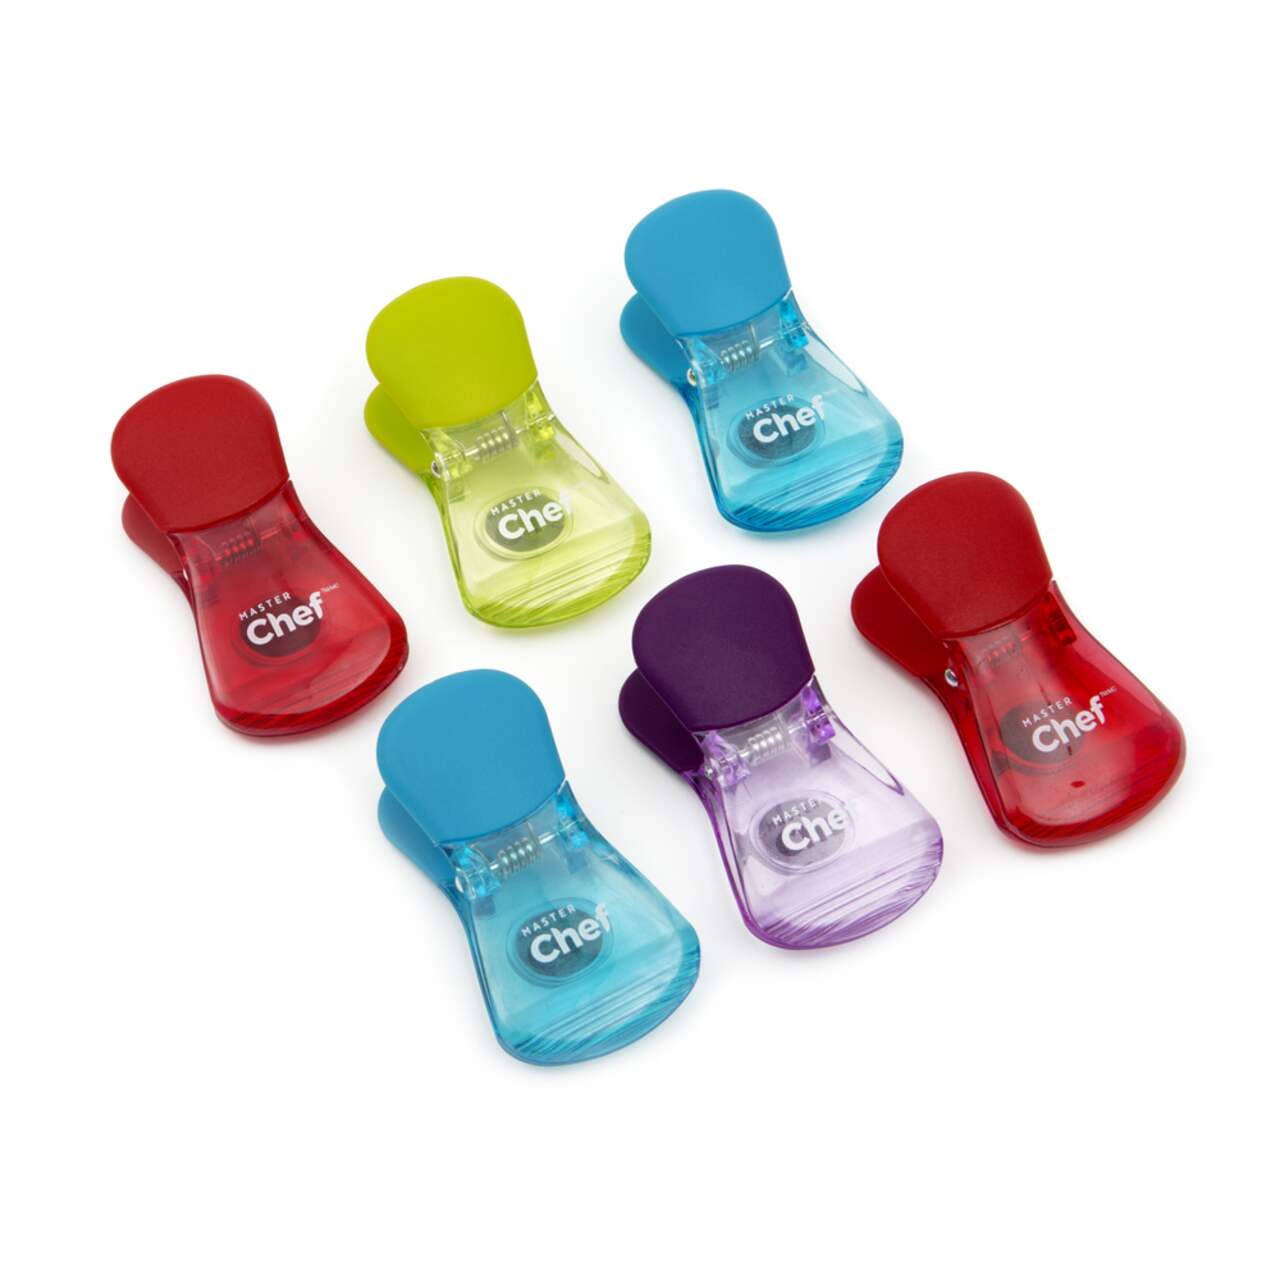 https://media-www.canadiantire.ca/product/living/kitchen/kitchen-tools-thermometers/1424246/masterchef-e-6-pack-coloured-bag-clips-88e48d29-b8f2-48e2-9914-ebf0aeeef68e.png?imdensity=1&imwidth=640&impolicy=mZoom